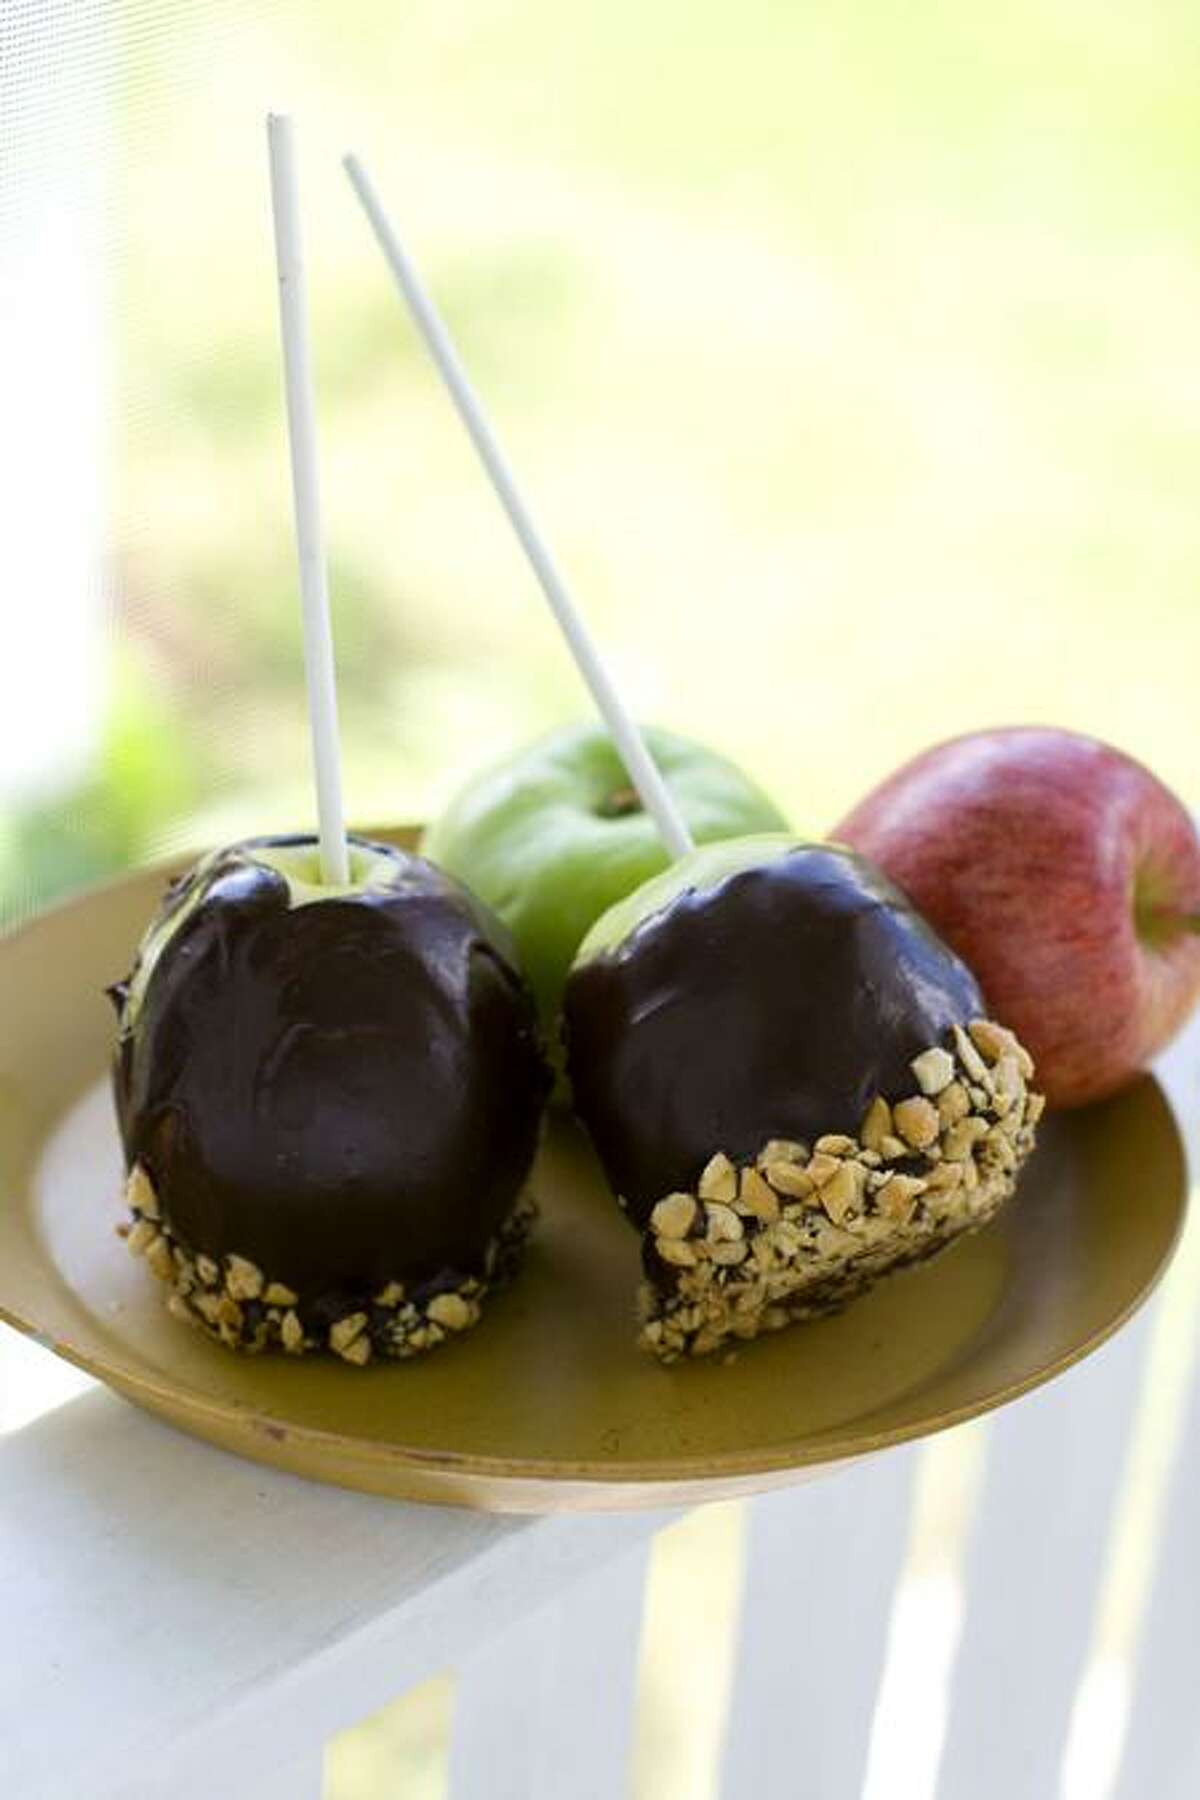 Matthew Mead/Associated Press: Chocolate Peanut Butter Covered Apples